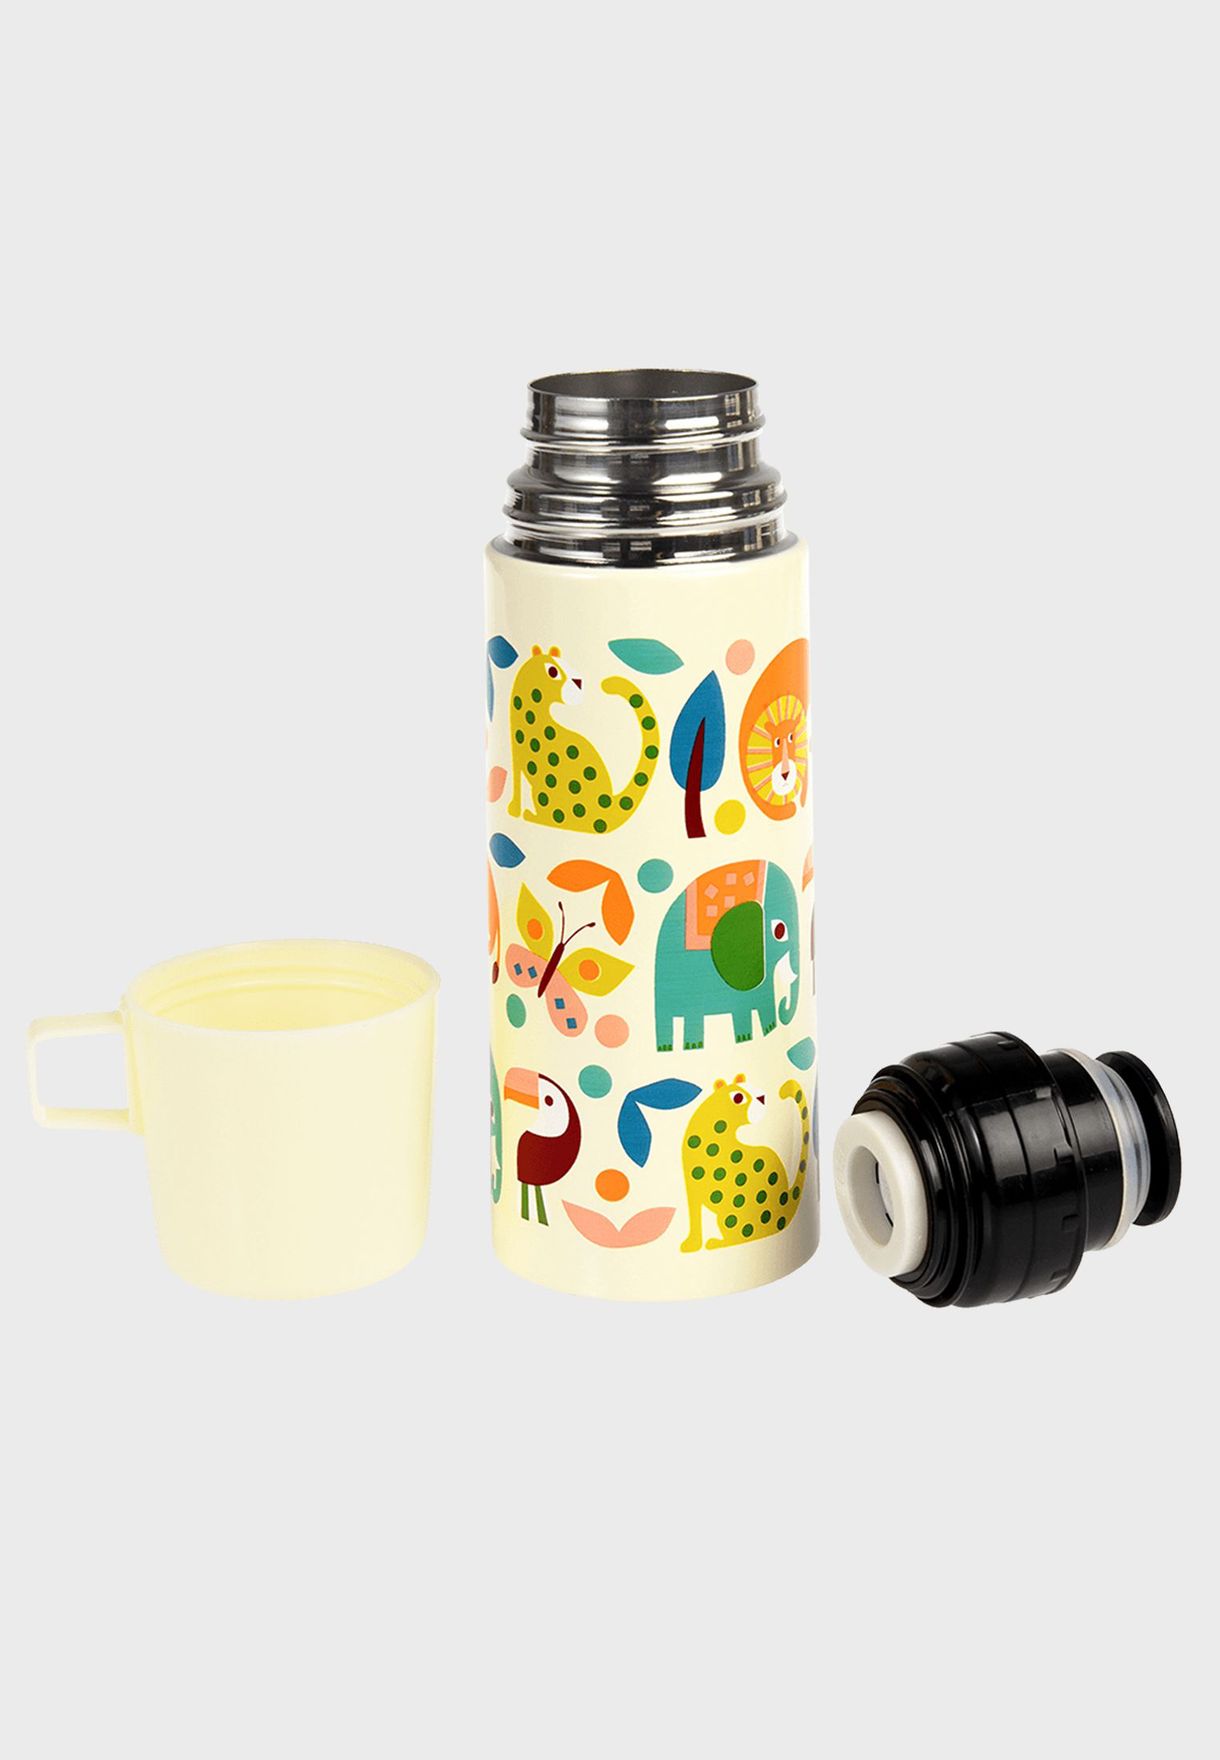 Wild Wonders Flask And Cup